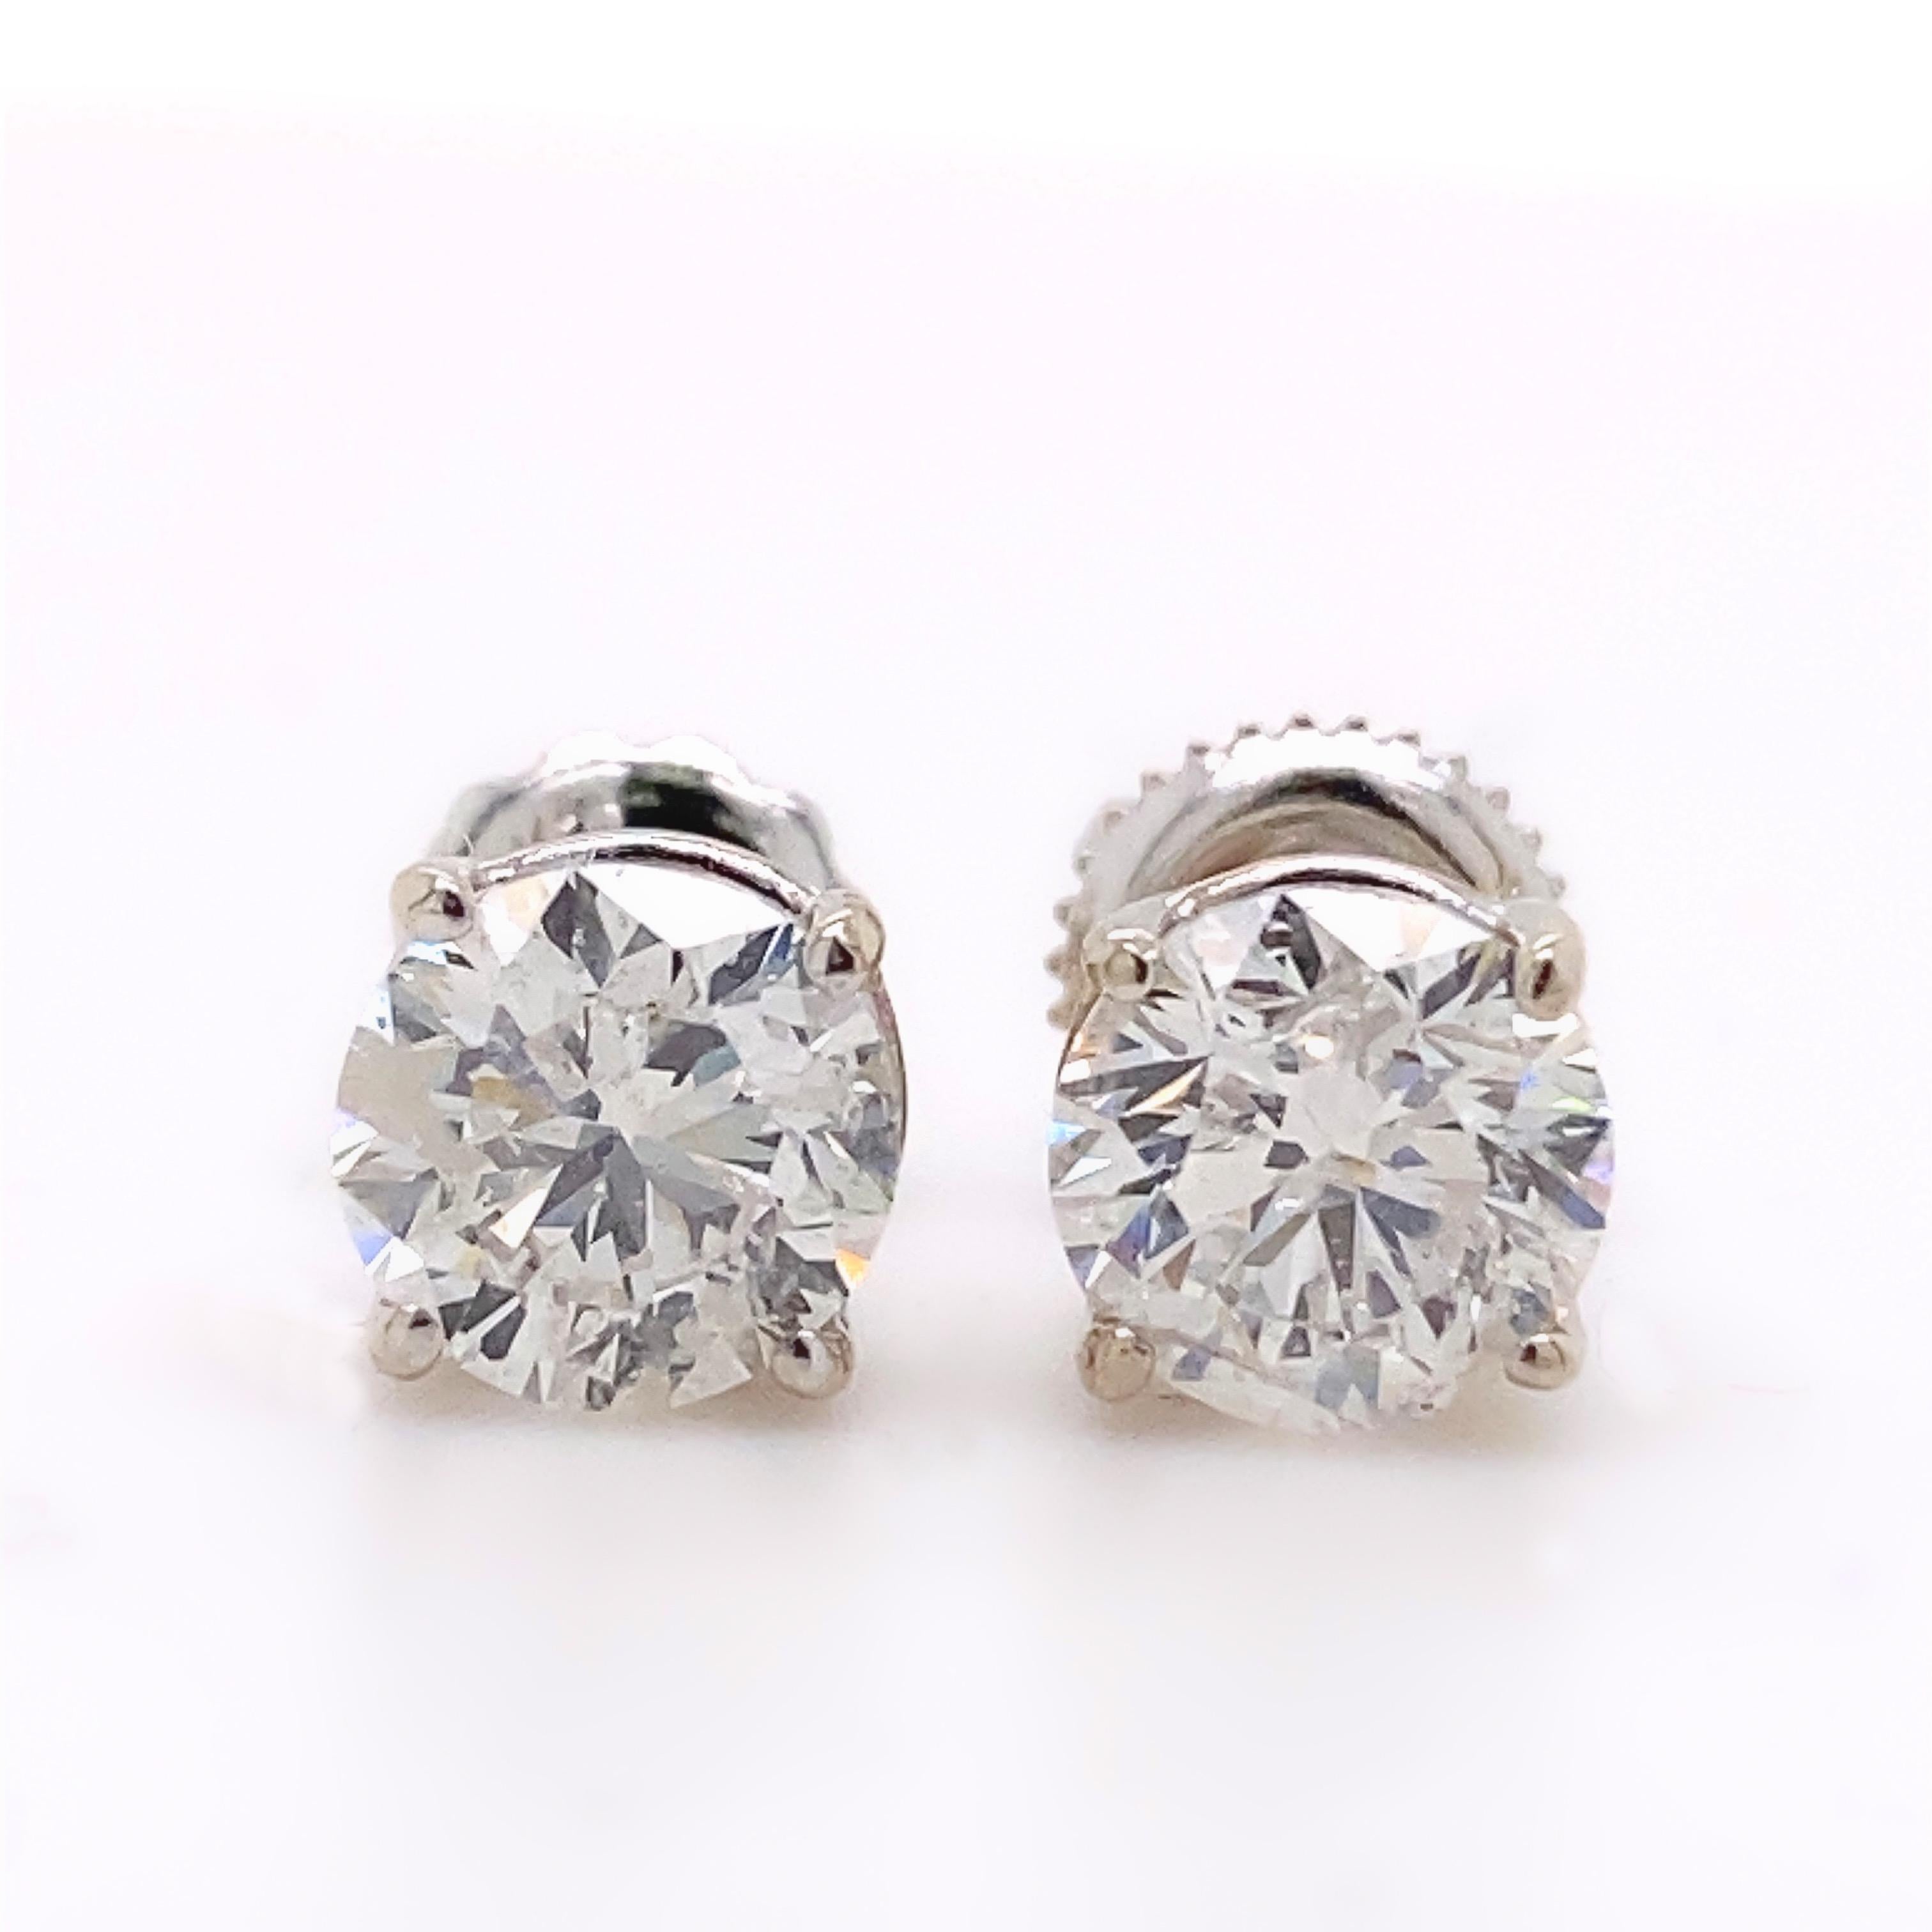 Round Solitaire Diamond Stud Earrings 1.82 Tcw Set in 14kt White Gold For Sale 1